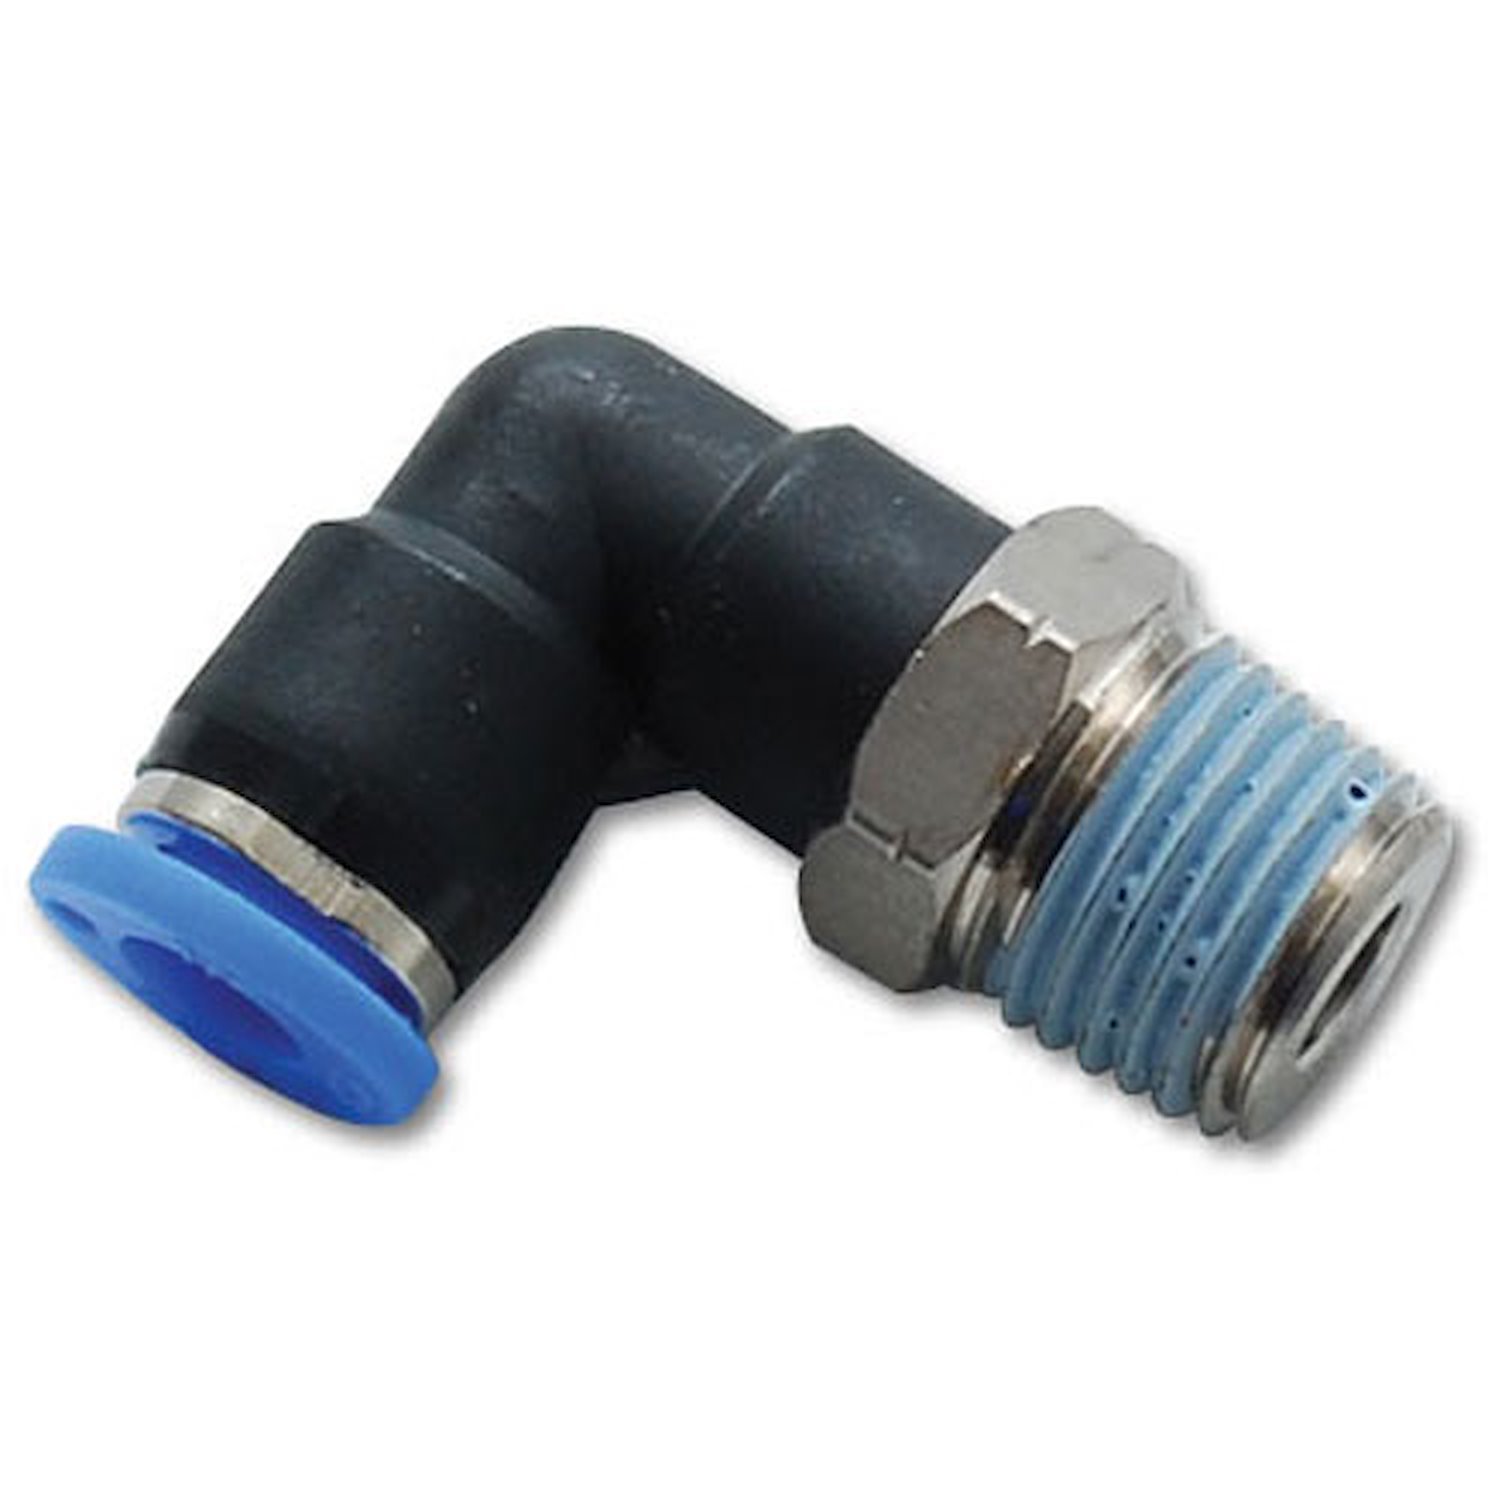 Male Elbow One-Touch Fitting 1/8" NPT Thread